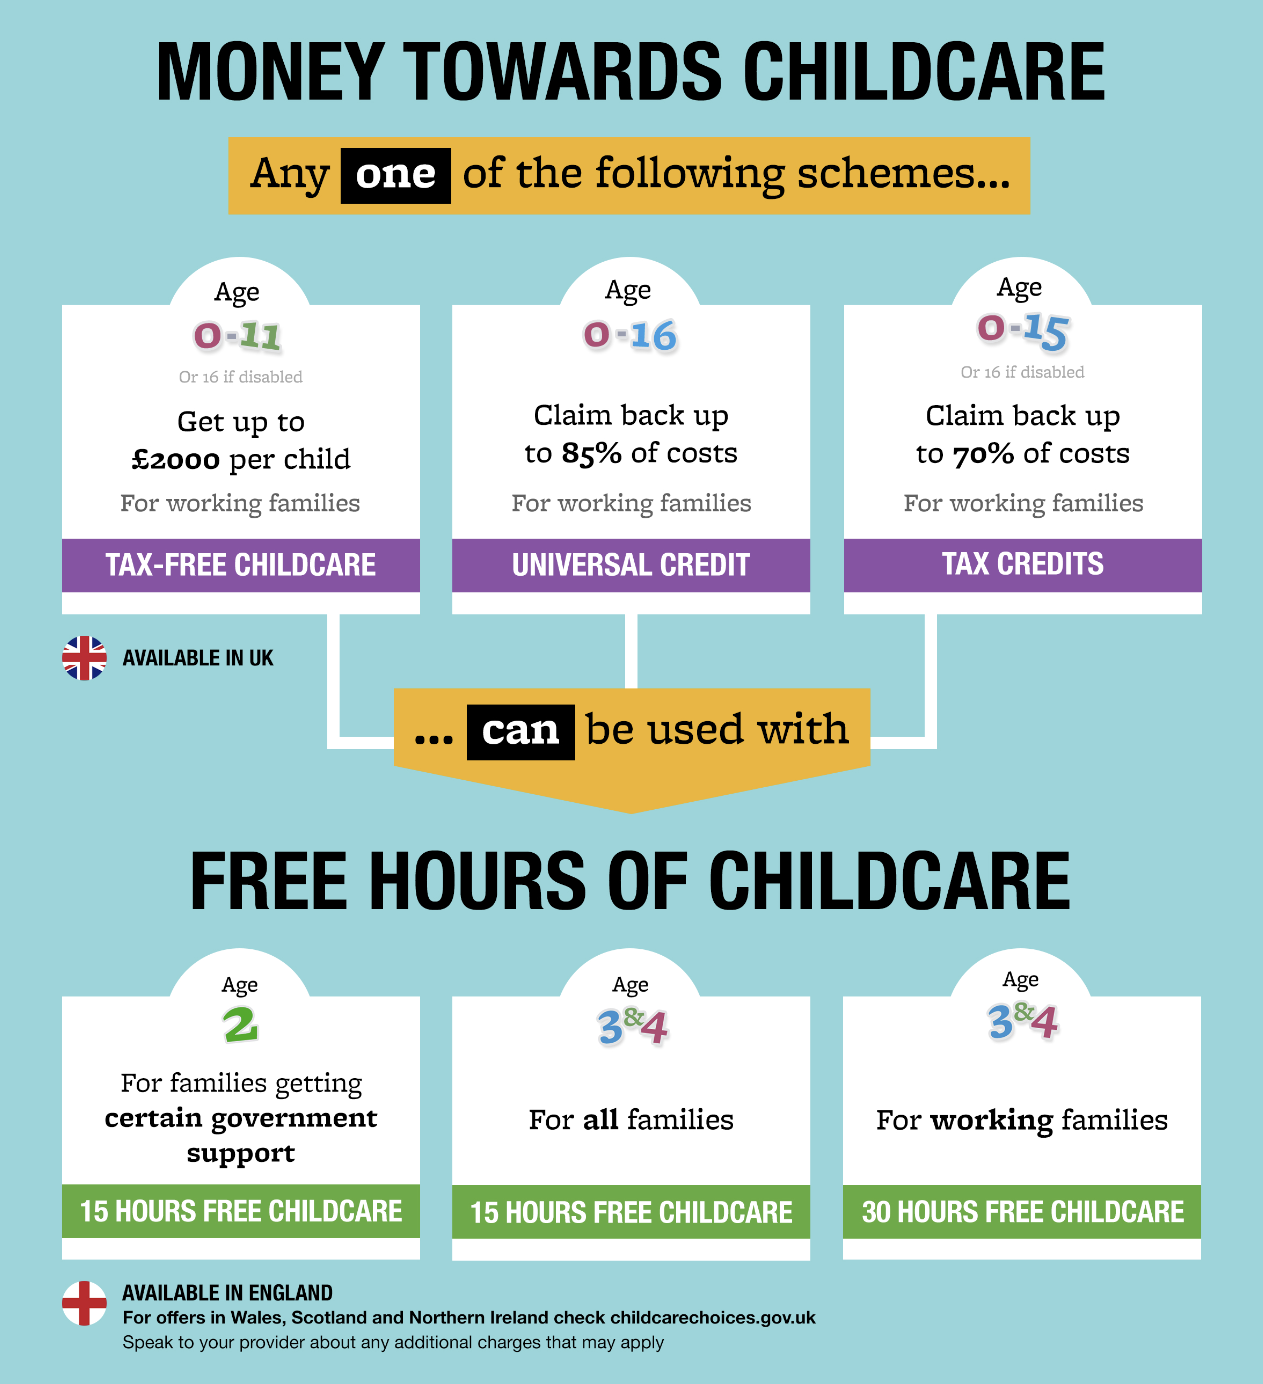 Money towards childcare any one of the following schemes age 0 to 11 or 16 if disabled get up to £2000 per child for working families tax free childcare; age 0 to 16 claim back up to 85% of costs for working families universal credit; age 0 to 15 or 16 if disabled claim back up to 70% of costs for working families tax credits. Can be used with age 2 for families getting certain government support 15 hours free ; age 3 and 4 for all families 15 hours free; age 3 and 4 for working families 30 hours free